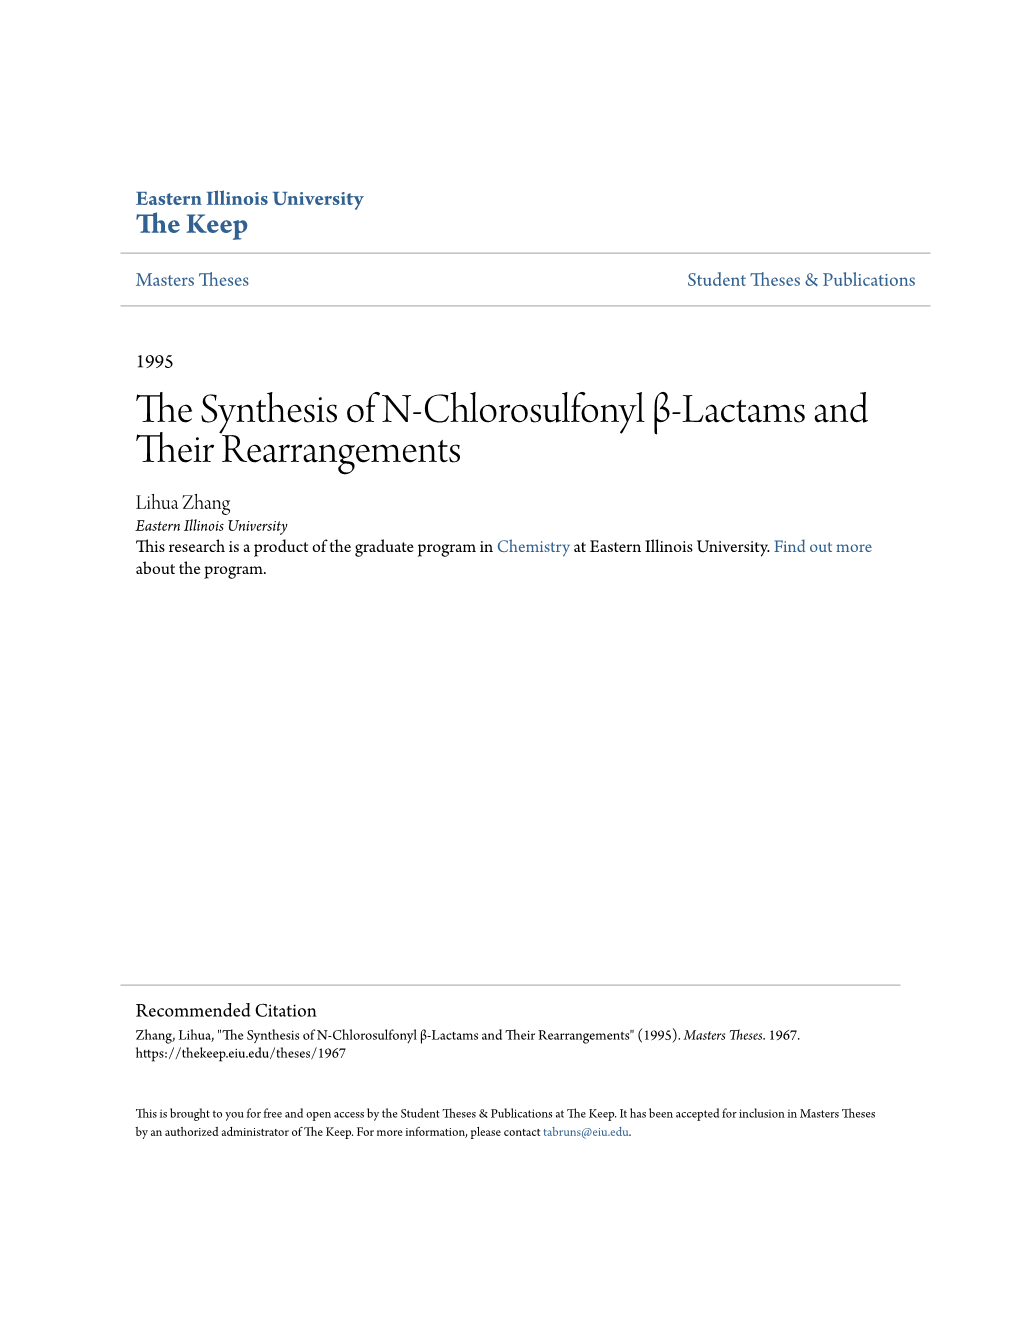 The Synthesis of N-Chlorosulfonyl Β-Lactams and Their Rearrangements